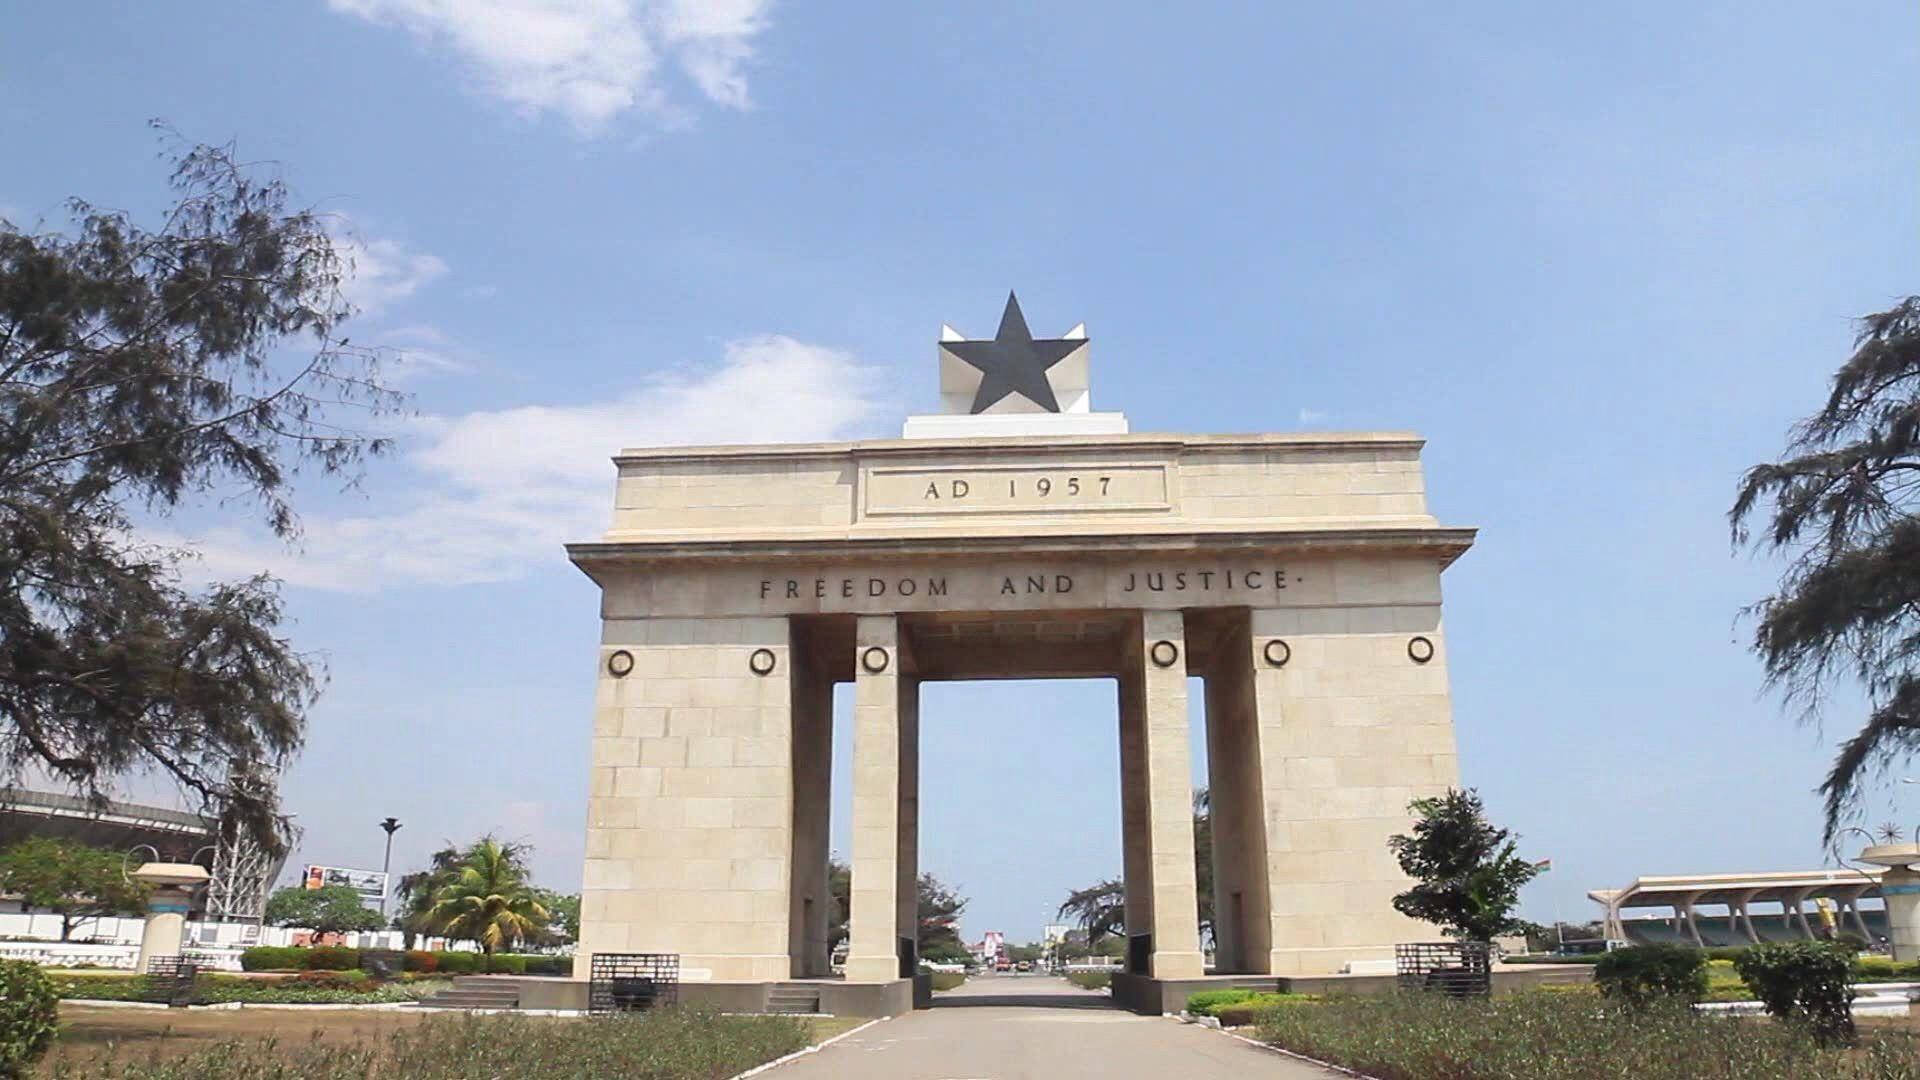 Ghana Independence Arch